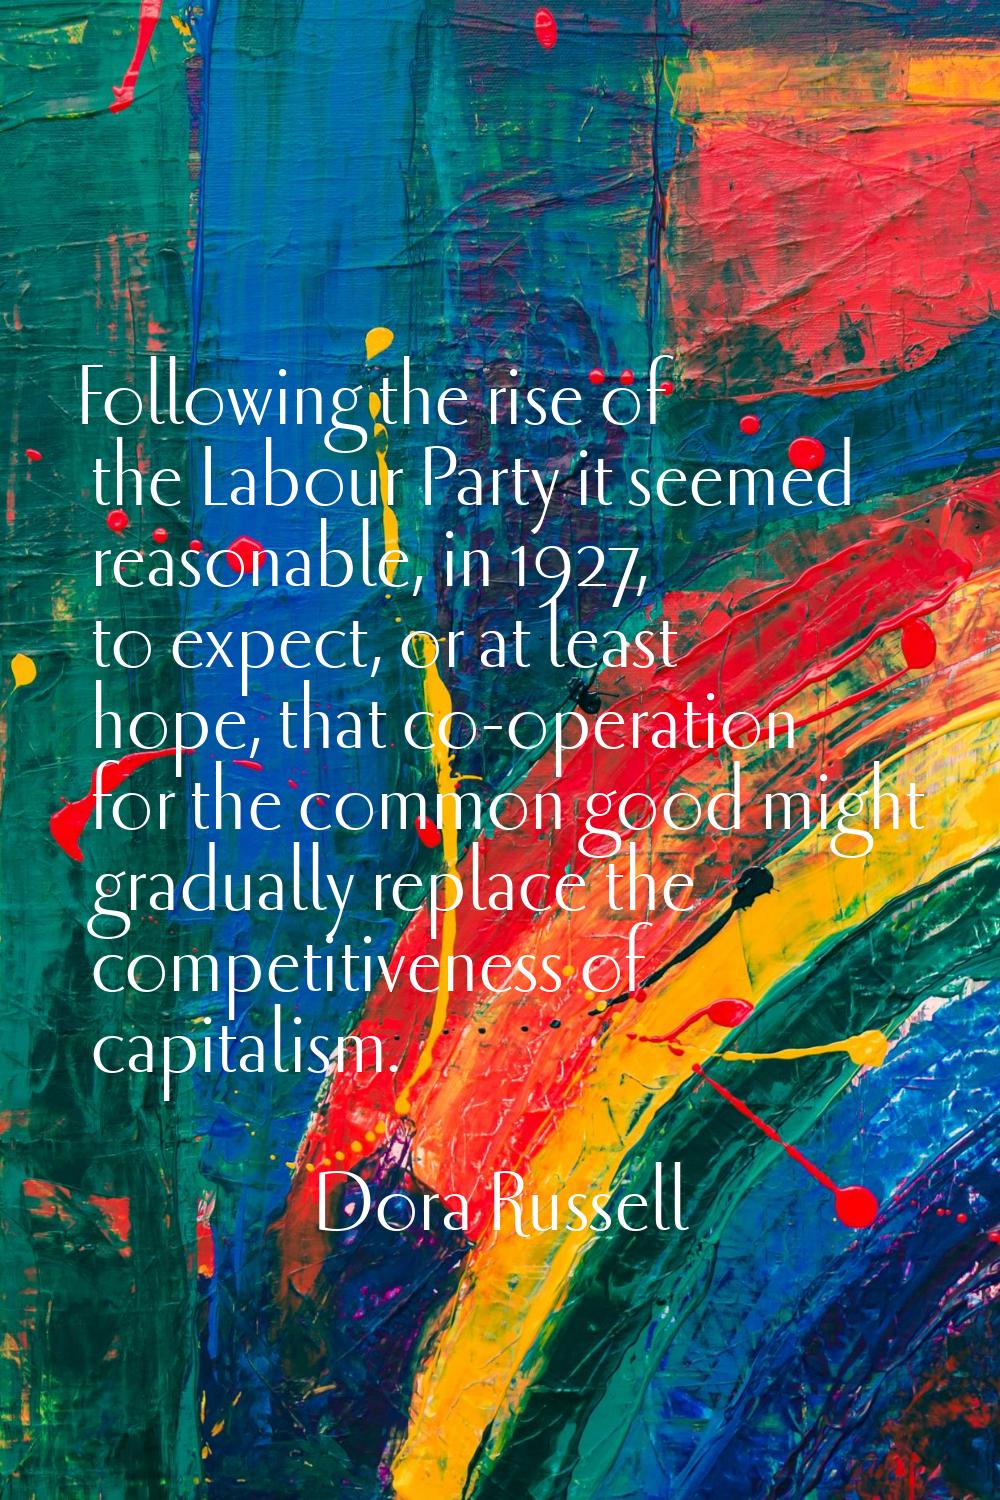 Following the rise of the Labour Party it seemed reasonable, in 1927, to expect, or at least hope, 